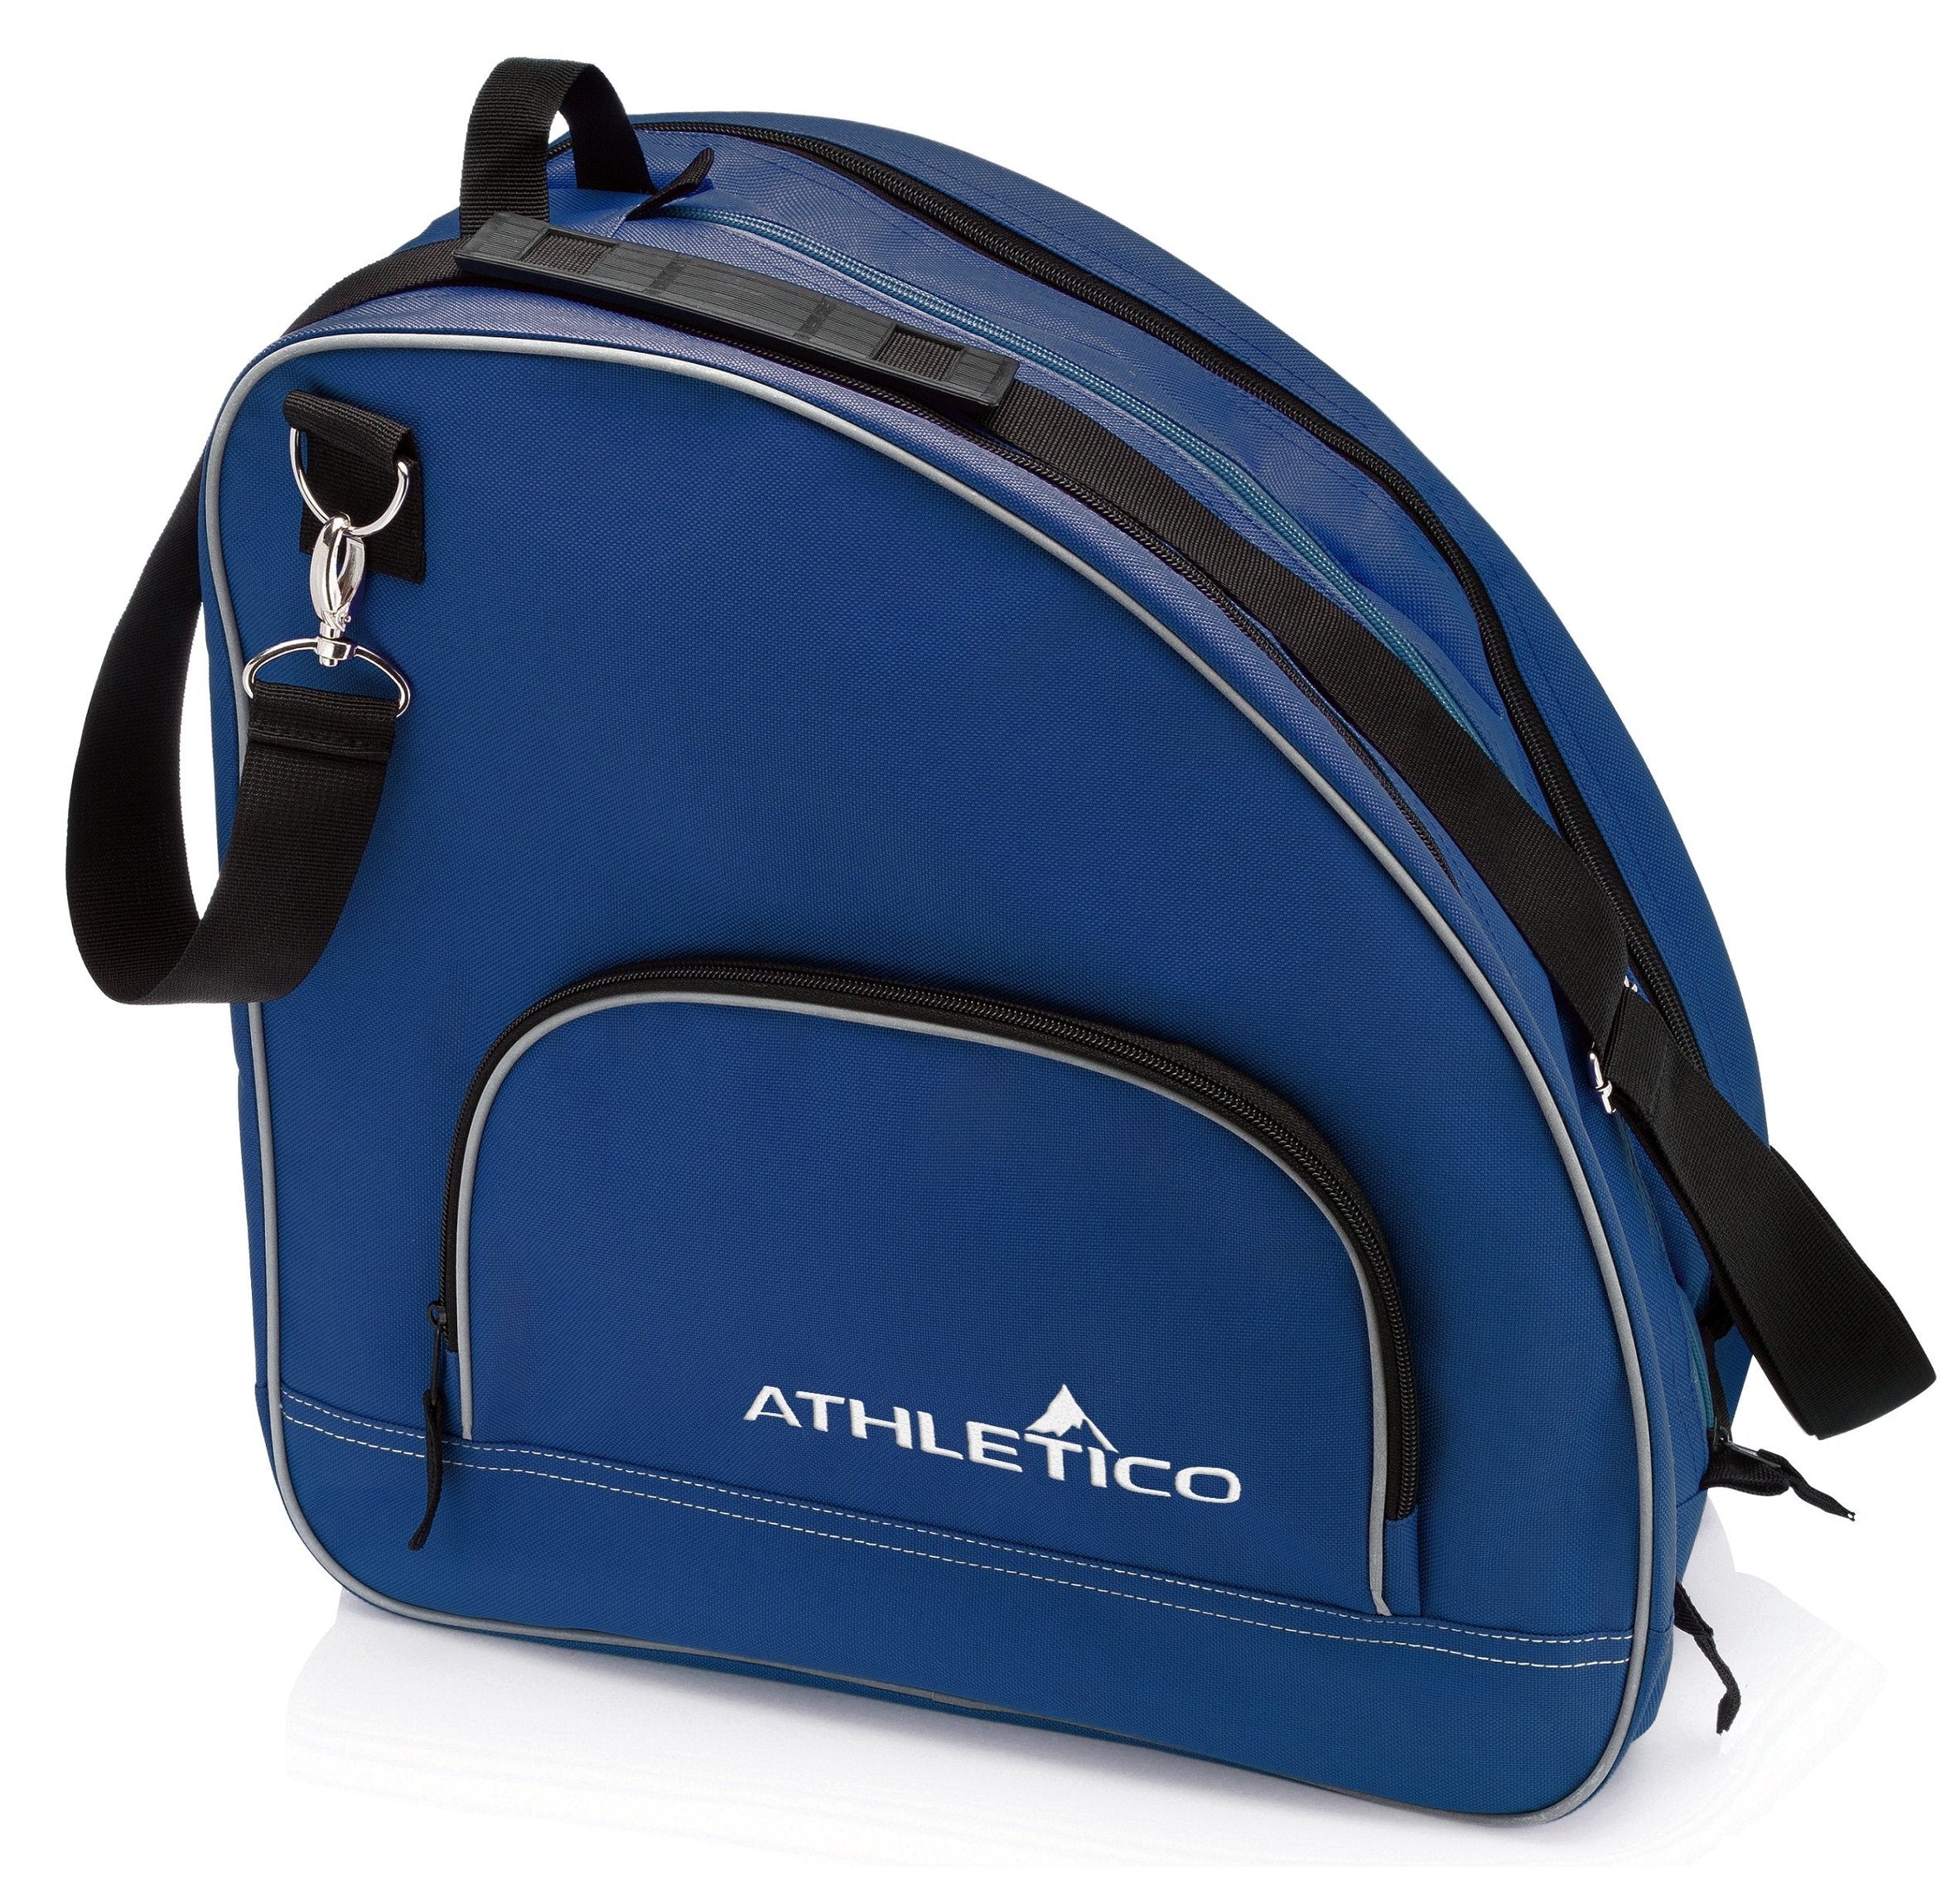 Athletico Ice & Inline Skate Bag - Premium Bag to Carry Ice Skates, Roller Skates, Inline Skates for Both Kids and Adults (Blue)